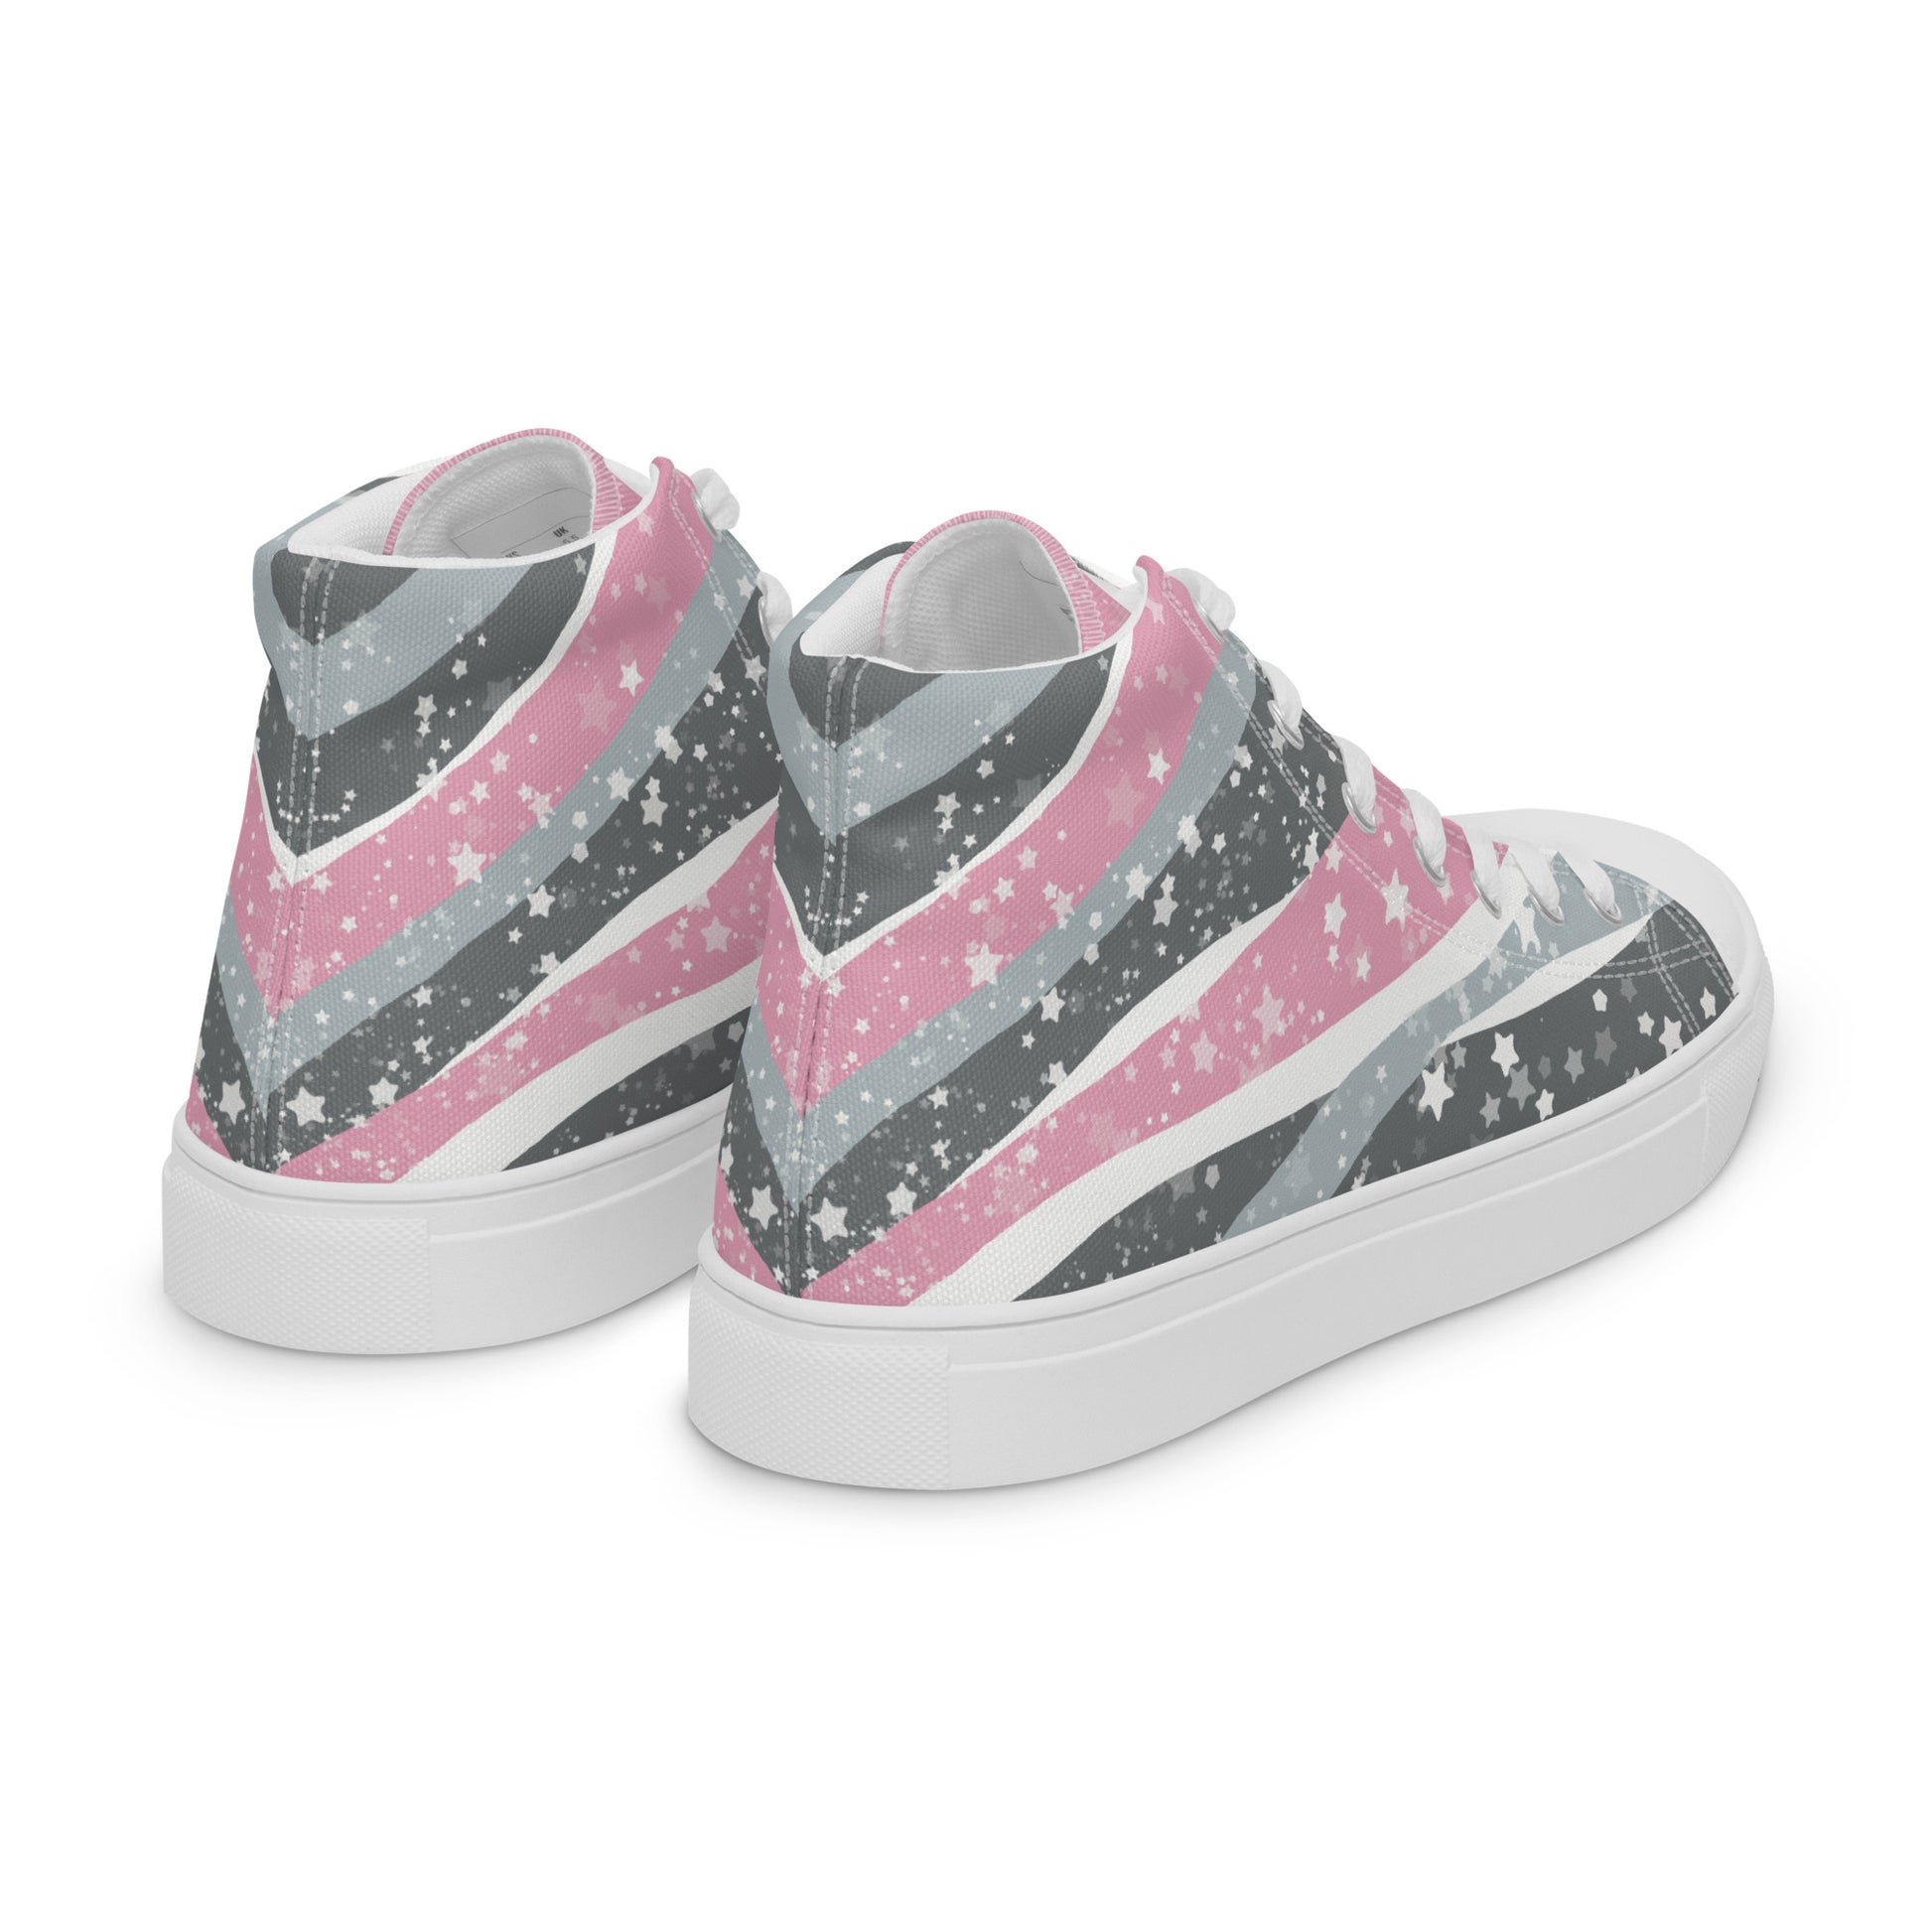 Right back view: A pair of high top shoes with ribbons of the demigirl flag colors and stars coming from the heel and getting larger across the shoe to the laces.